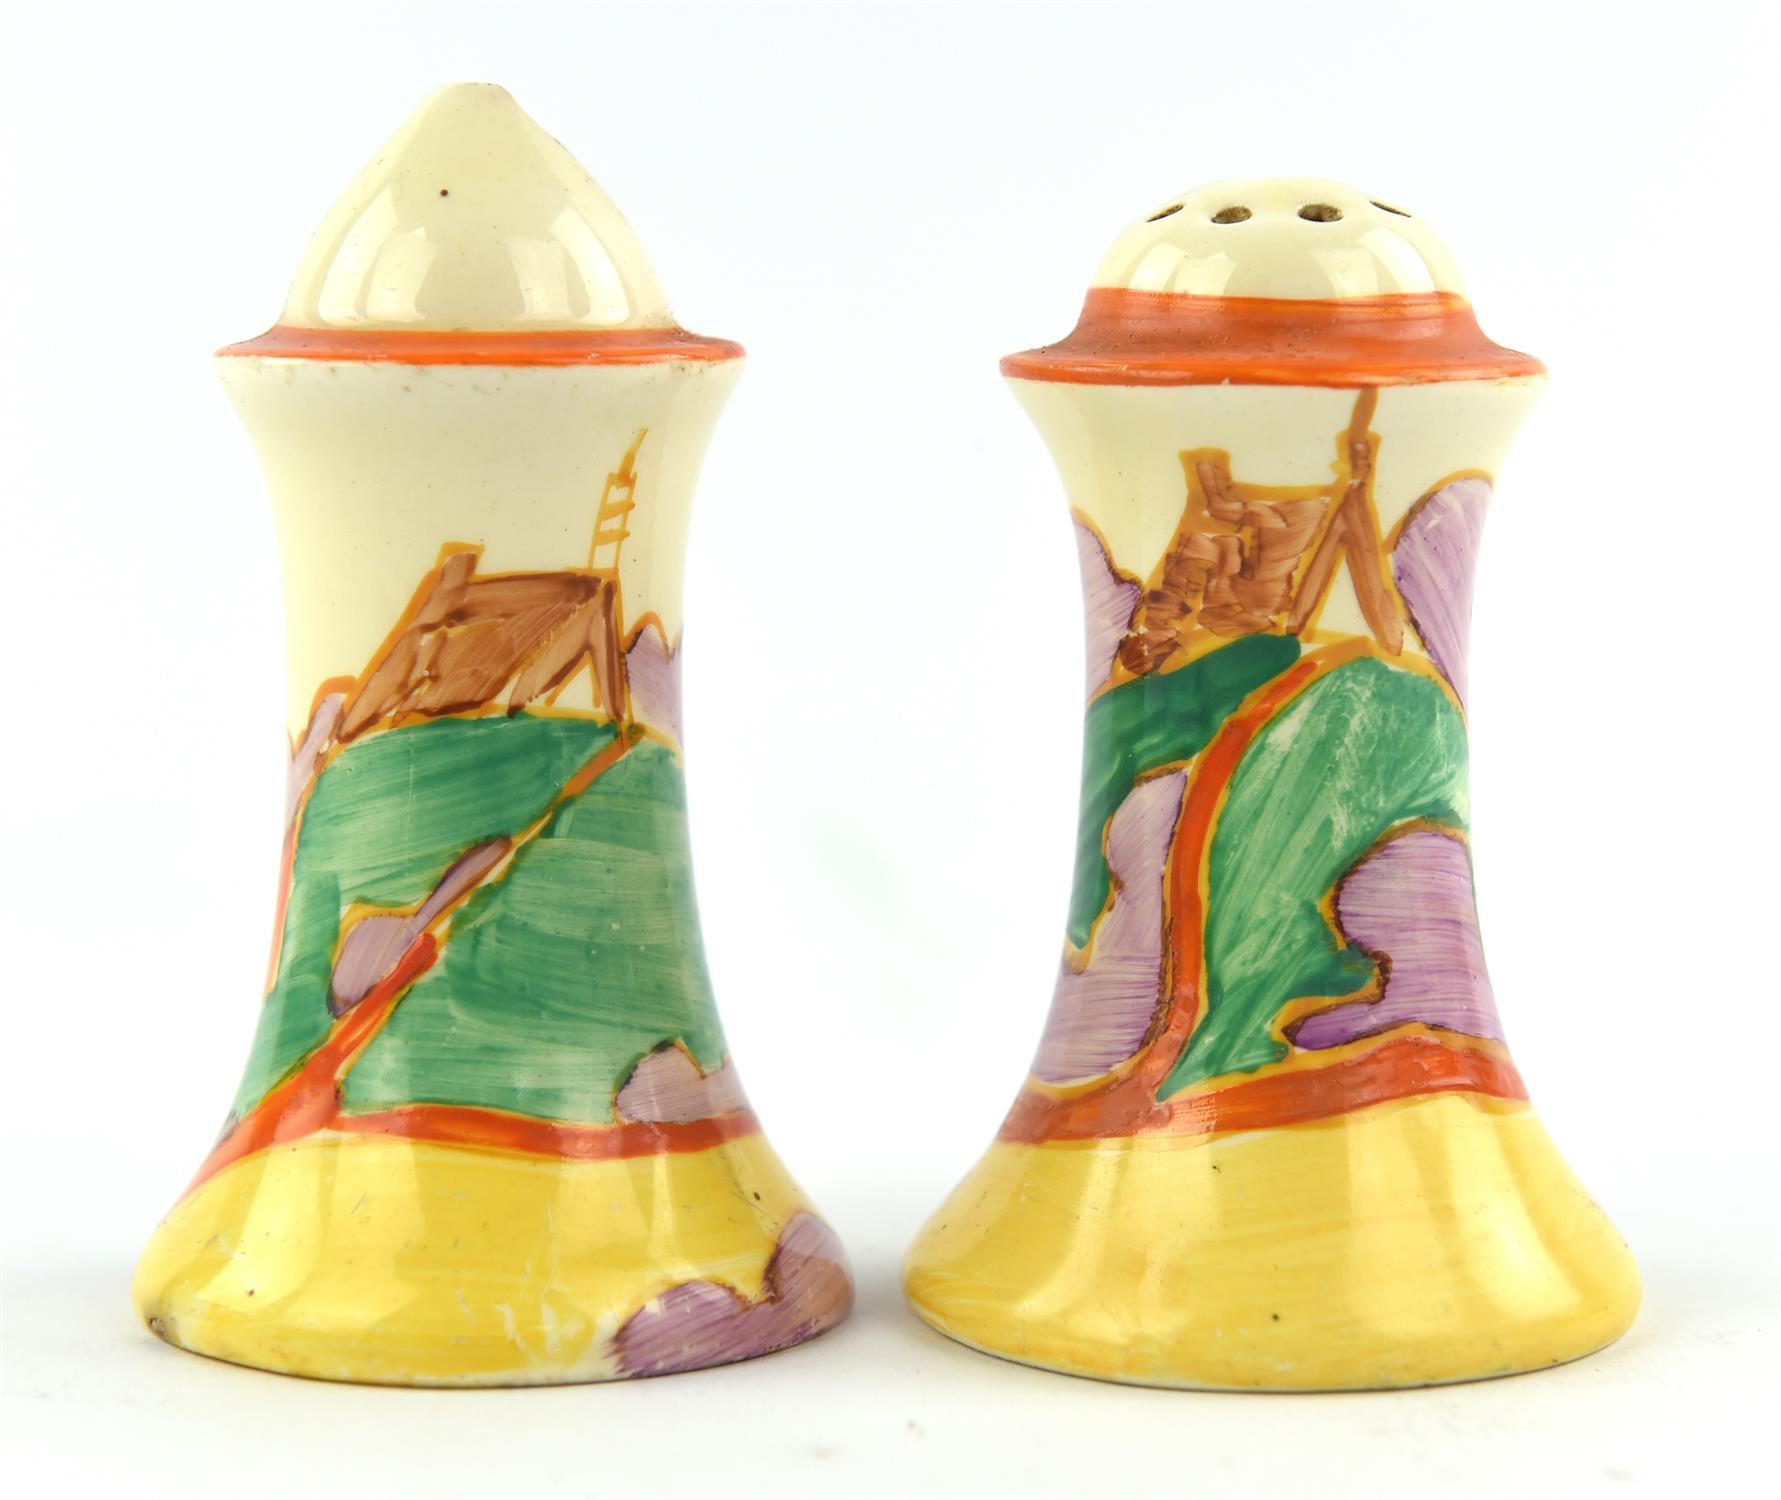 A pair of Clarice Cliff salt and pepper shakers, C.1930, decorated in the 'Orange Roof' pattern.